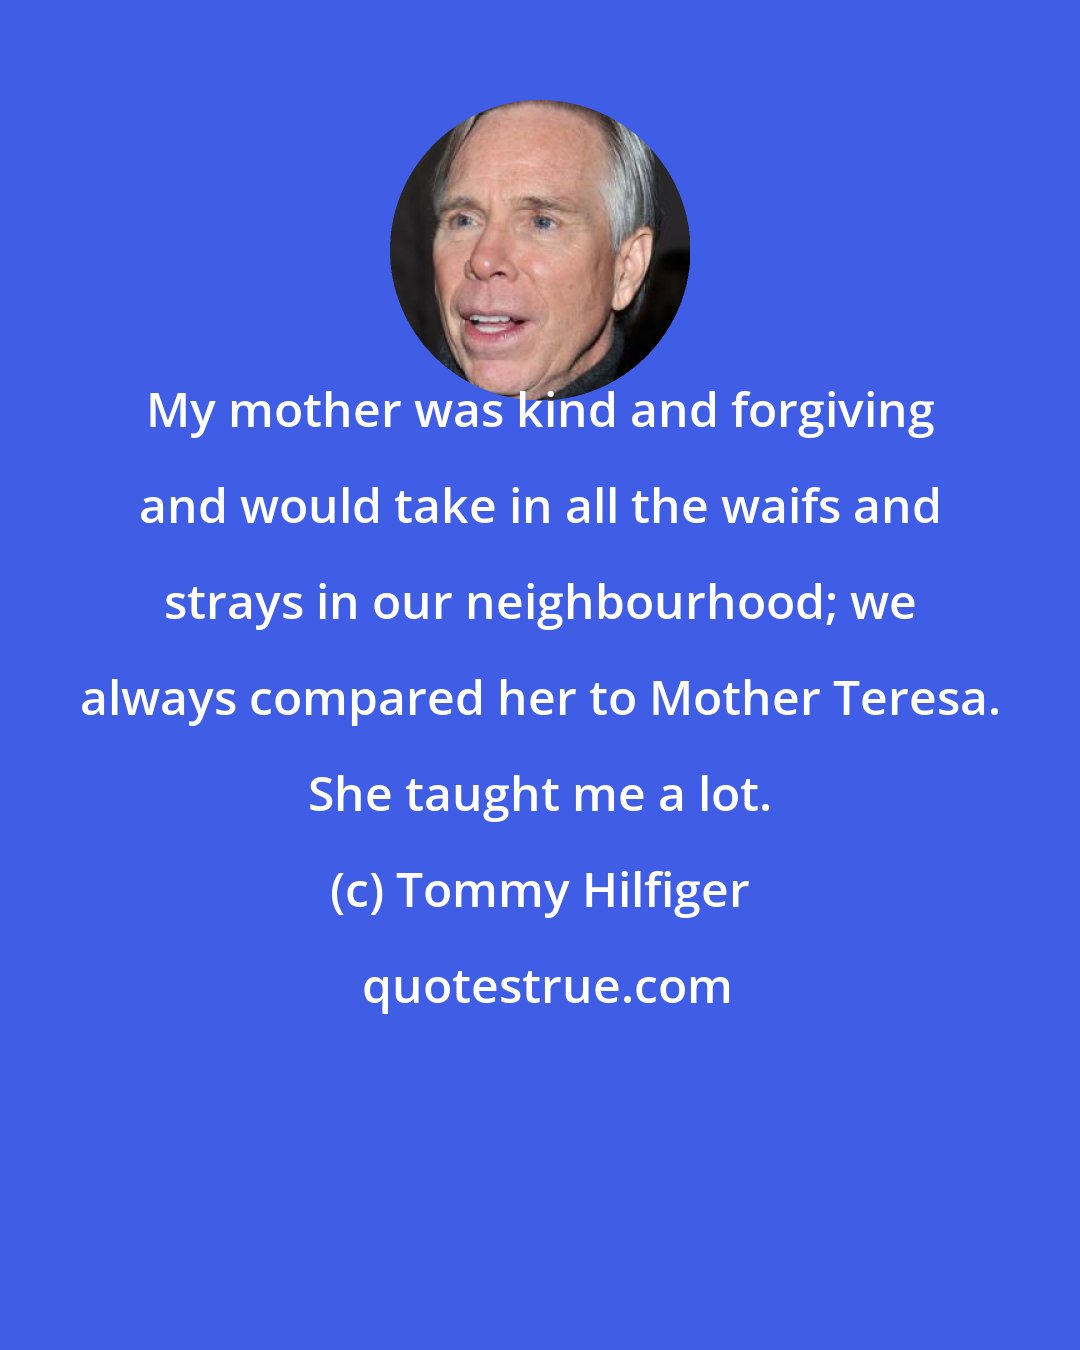 Tommy Hilfiger: My mother was kind and forgiving and would take in all the waifs and strays in our neighbourhood; we always compared her to Mother Teresa. She taught me a lot.